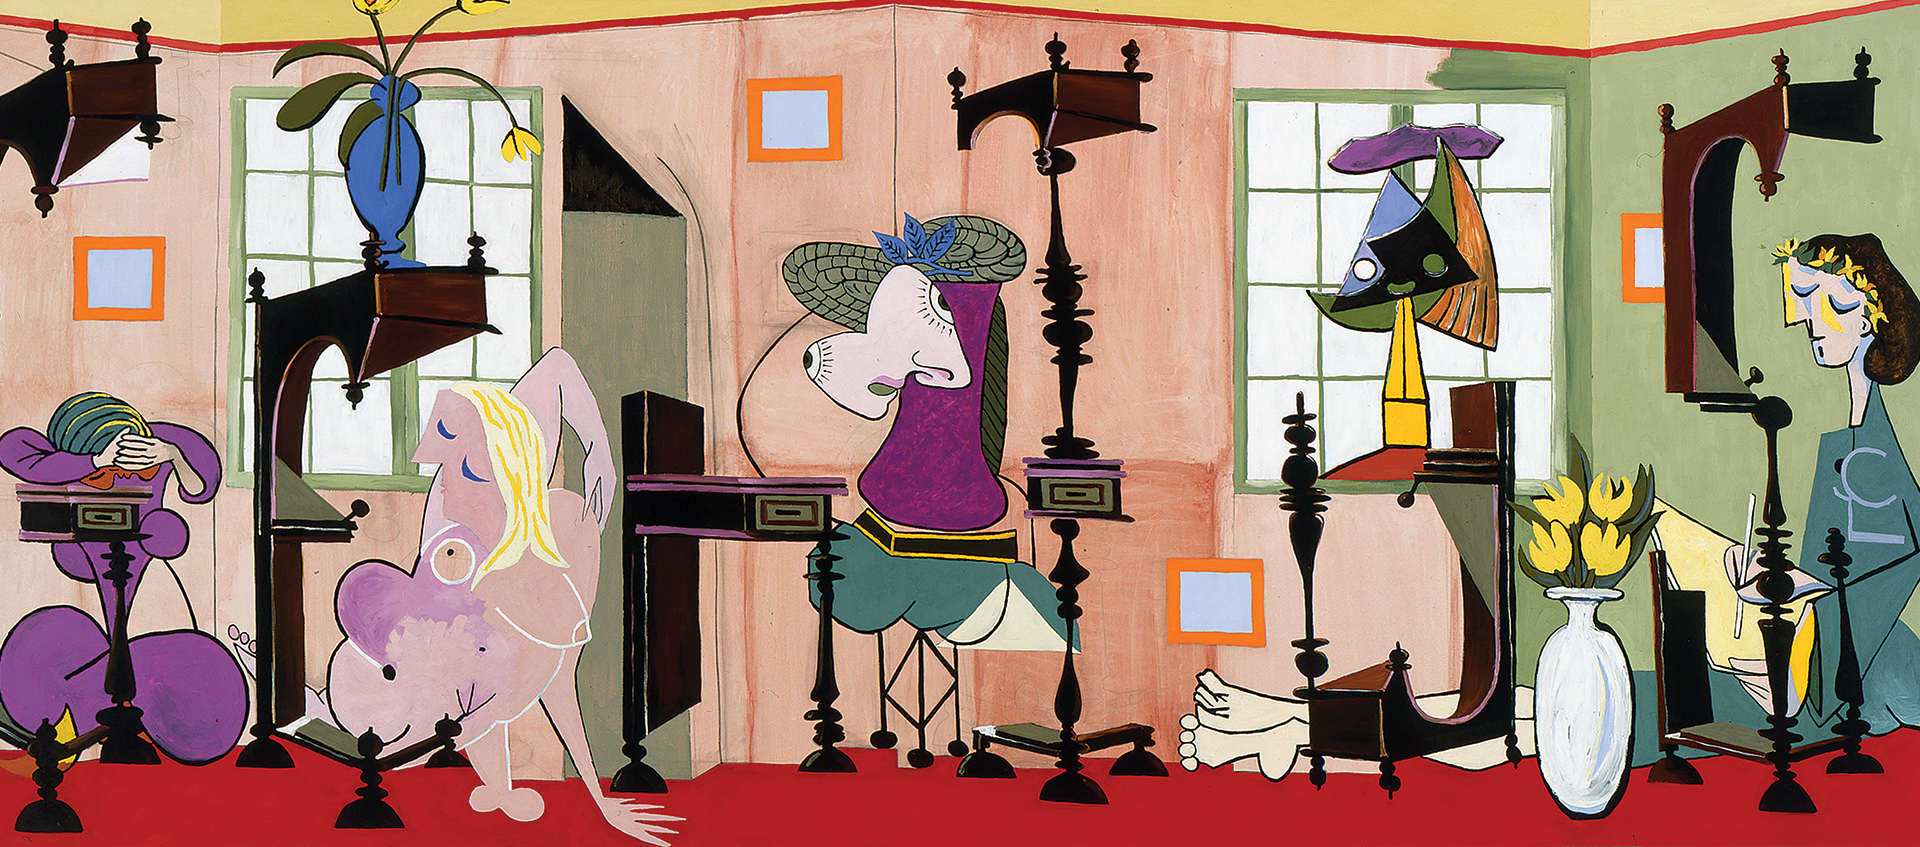 Detail of Sean Landers work showing several figures interacting in a colorful room rendered in a surreal Picasso style